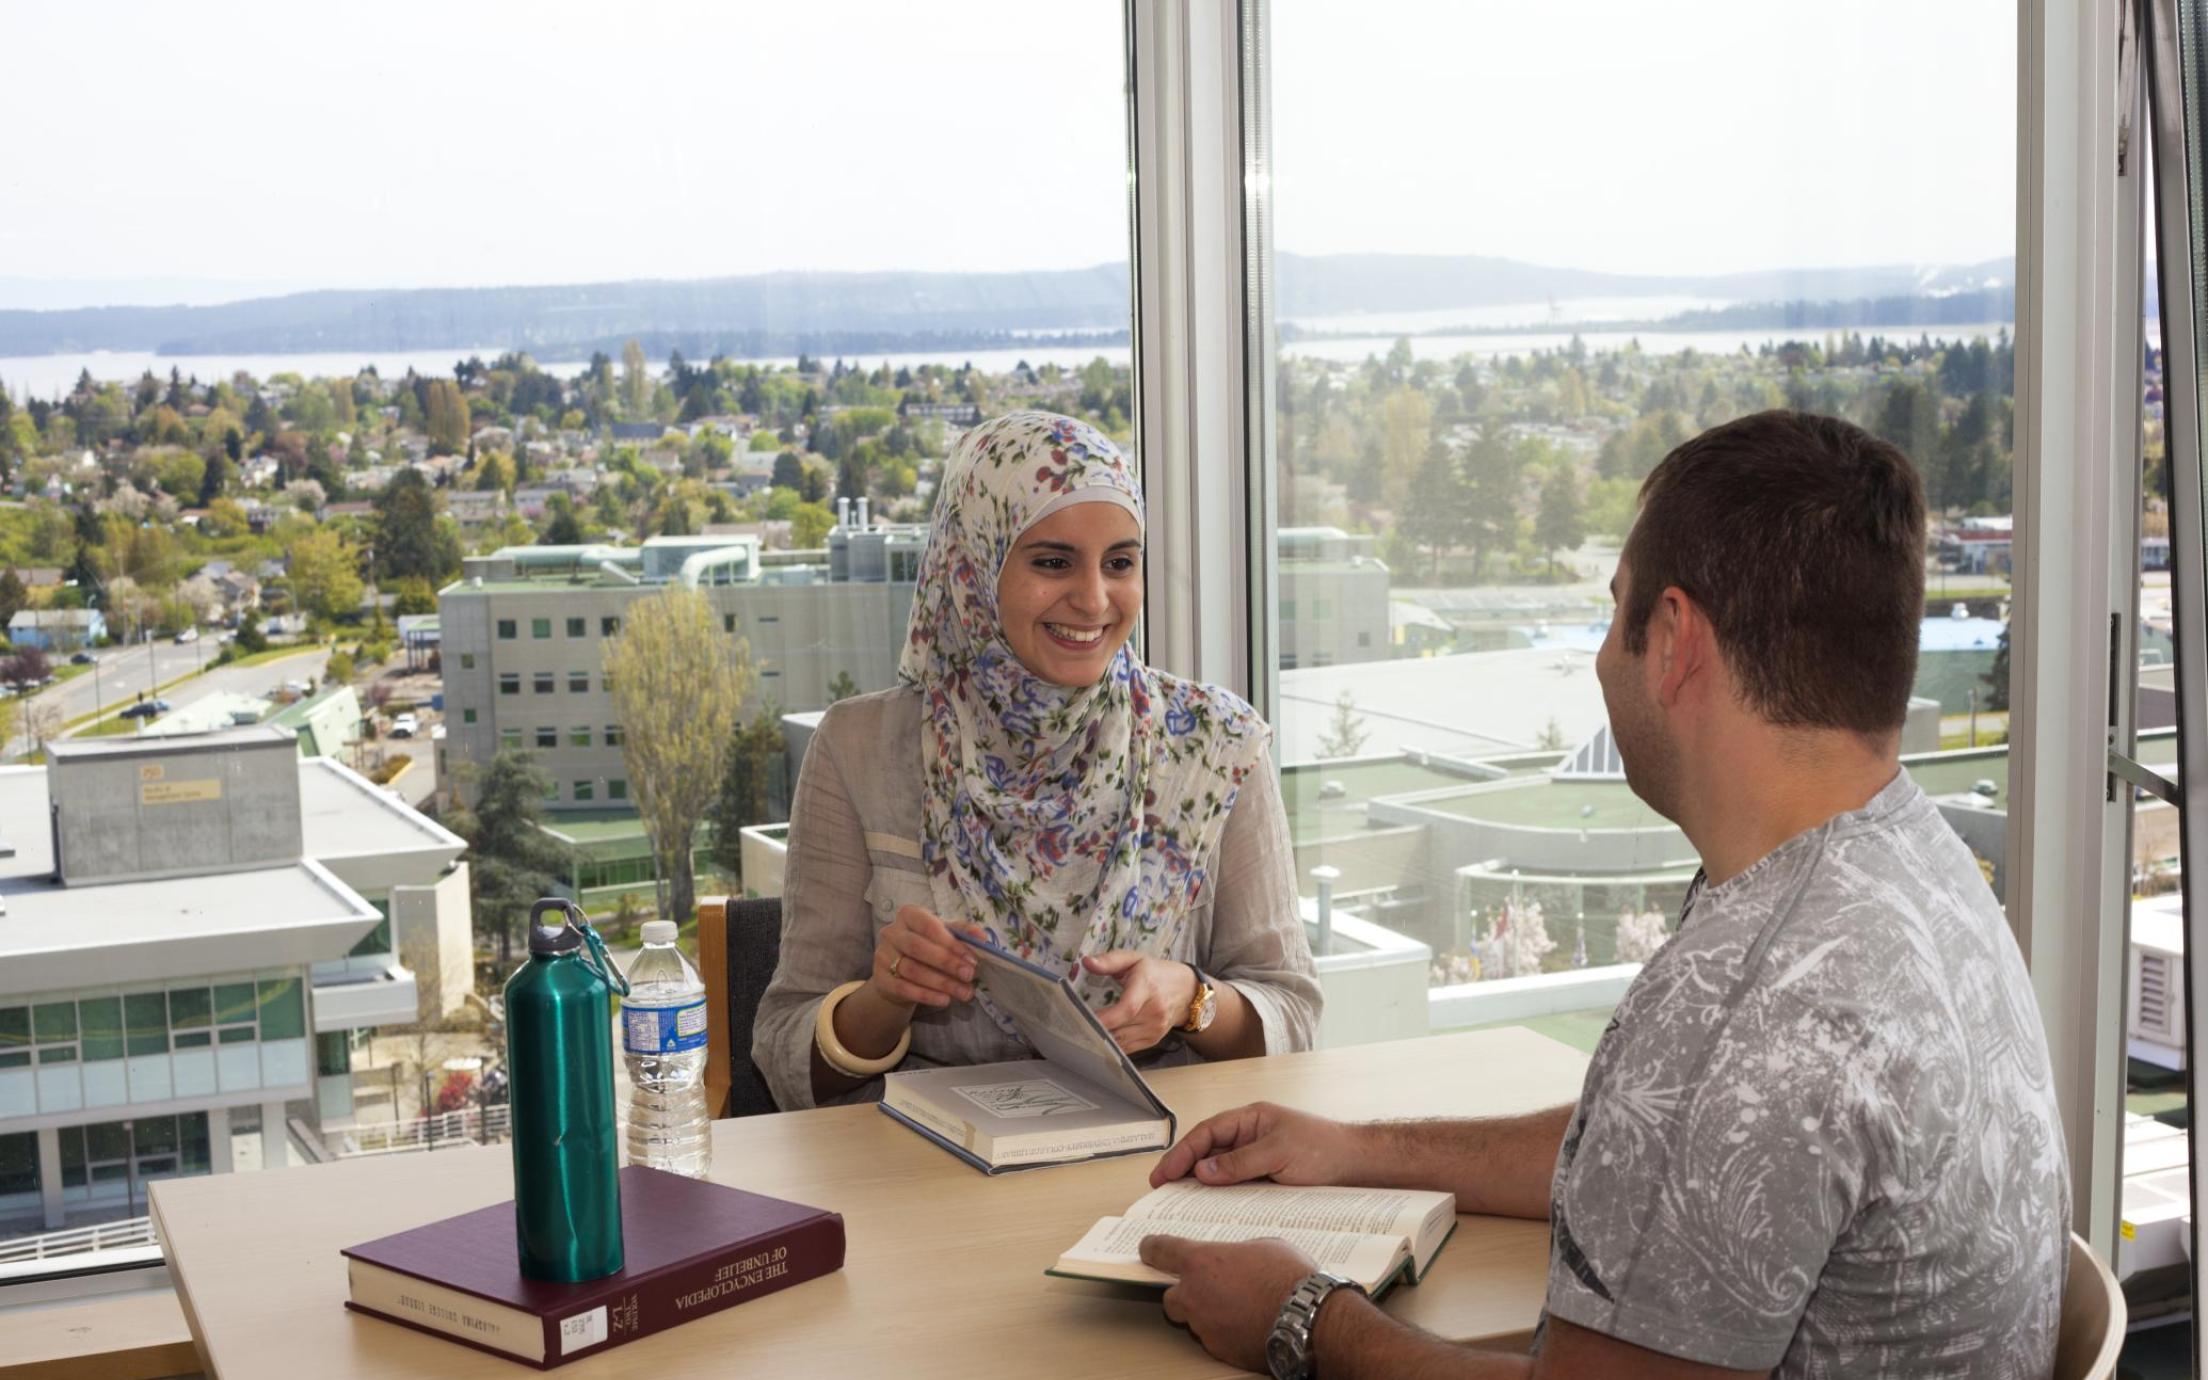 man and woman smiling while sitting across from one another at a table by a window. textbooks are on the desk in front of them